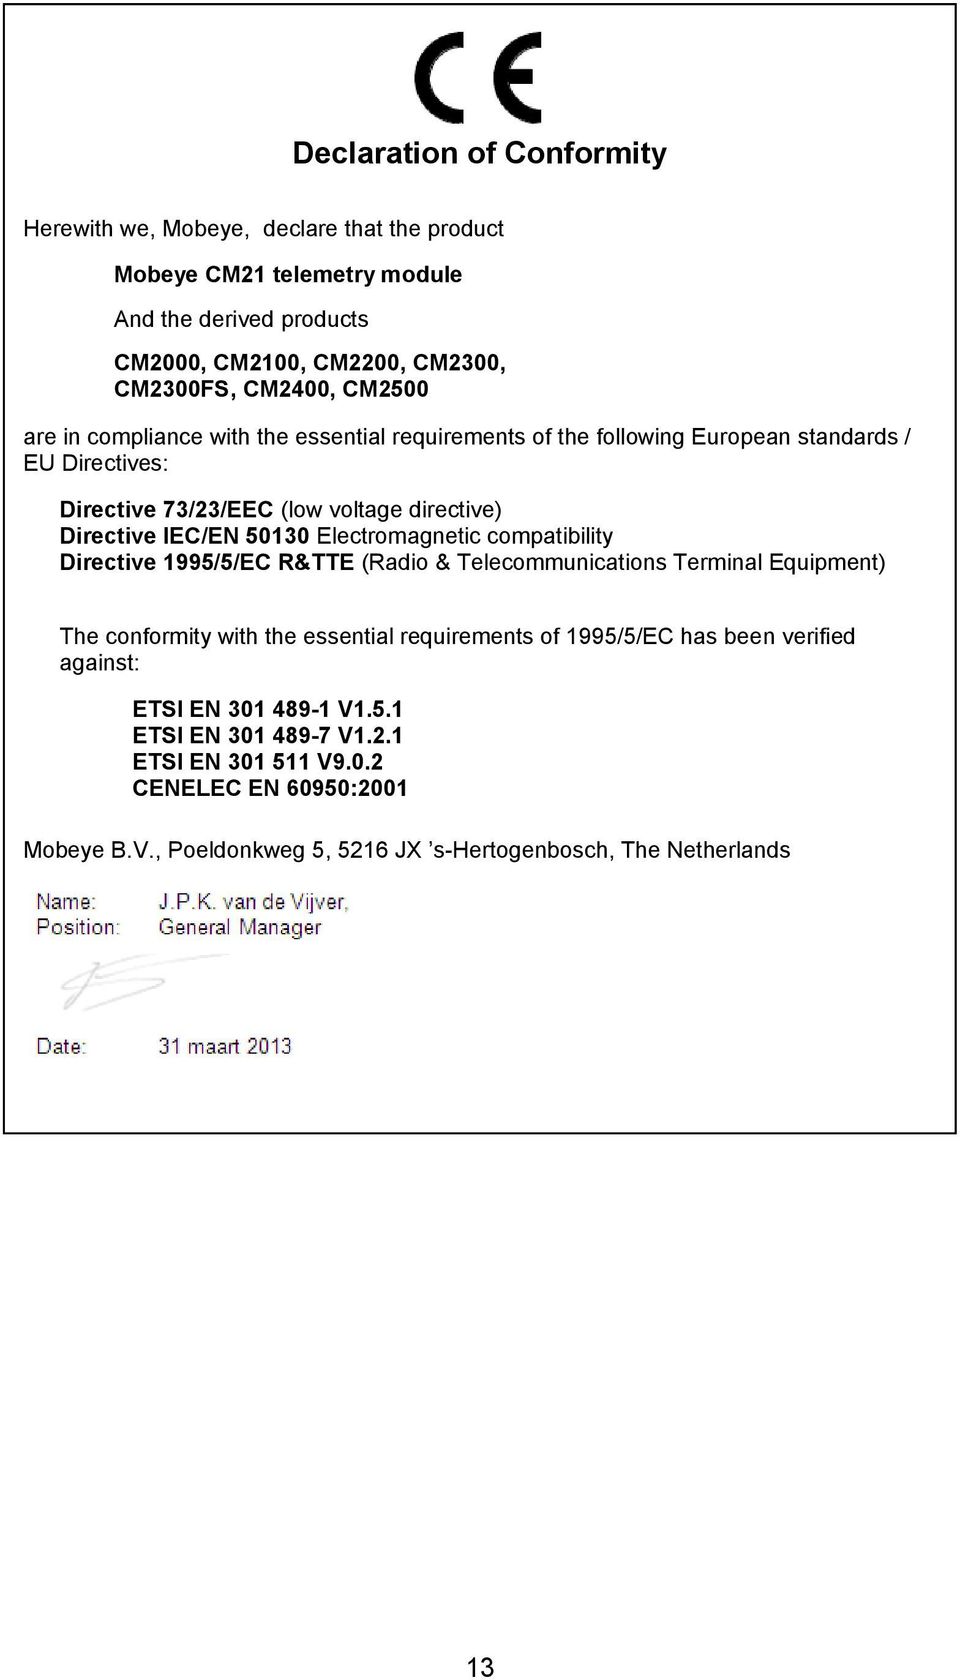 Electromagnetic compatibility Directive 1995/5/EC R&TTE (Radio & Telecommunications Terminal Equipment) The conformity with the essential requirements of 1995/5/EC has been